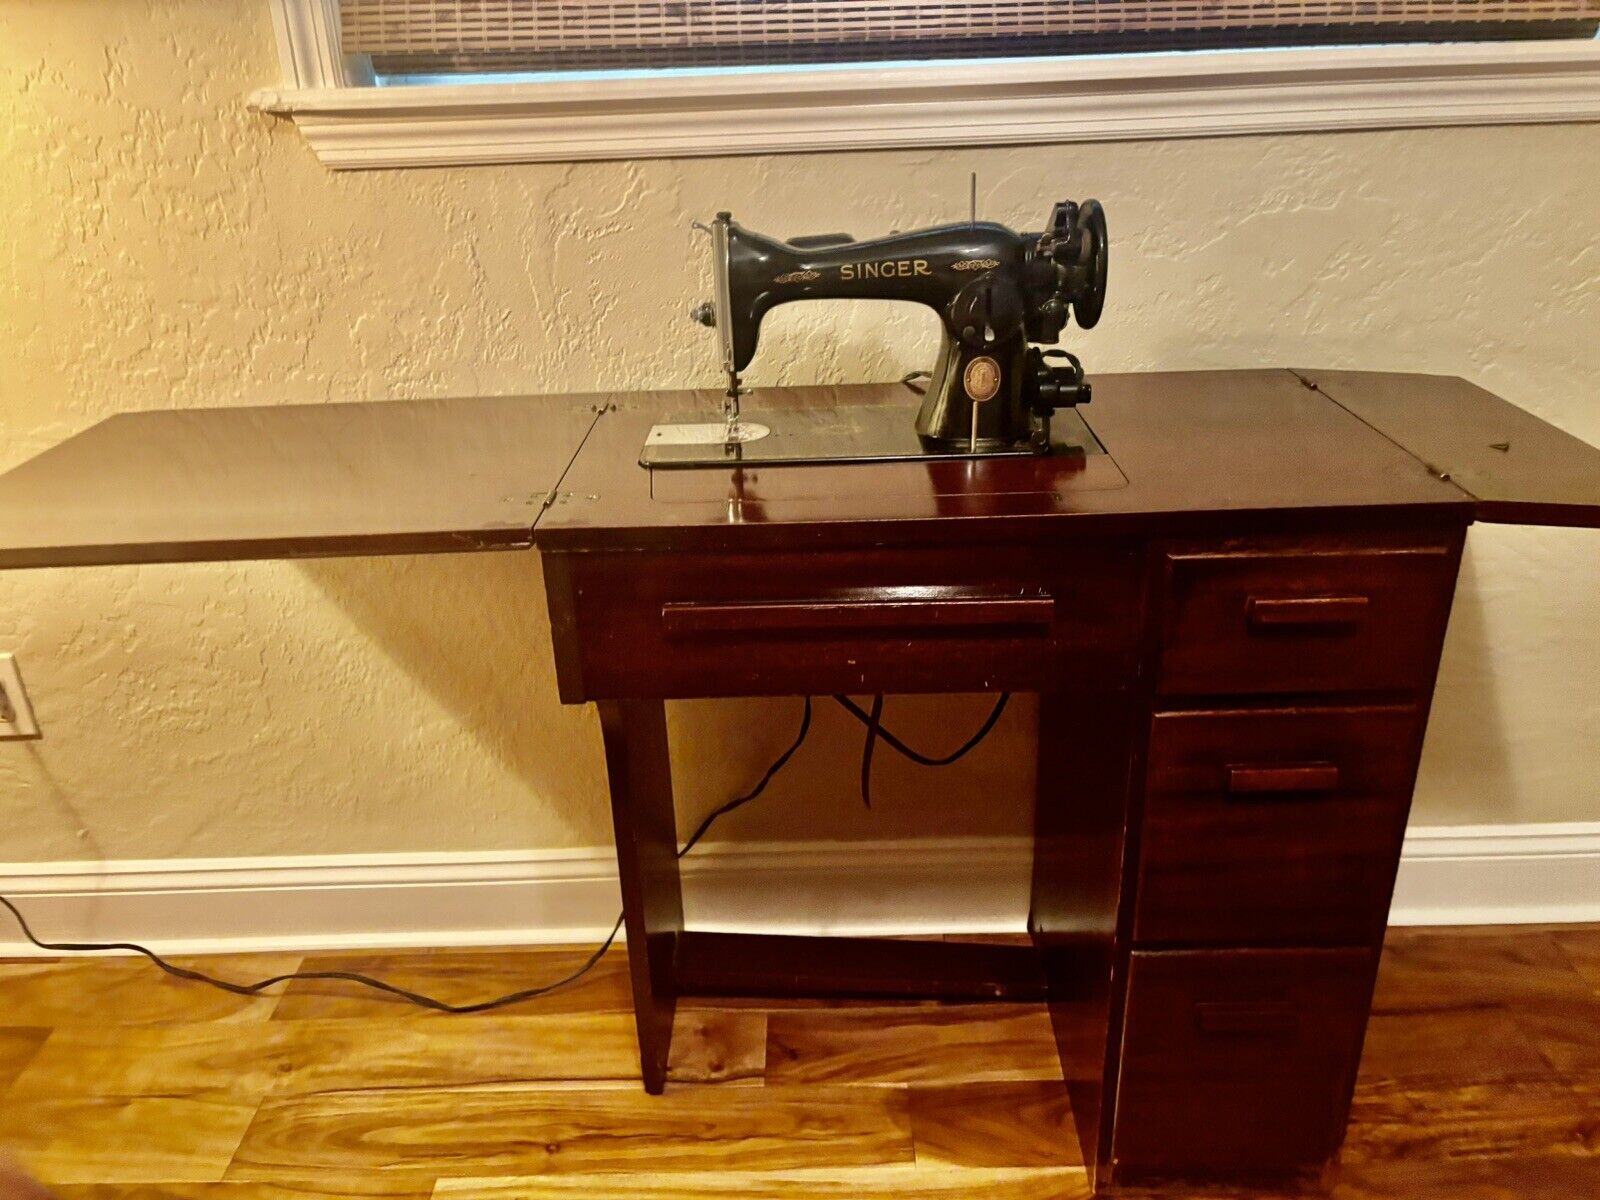 1952 Singer Sewing Machine And Cabinet